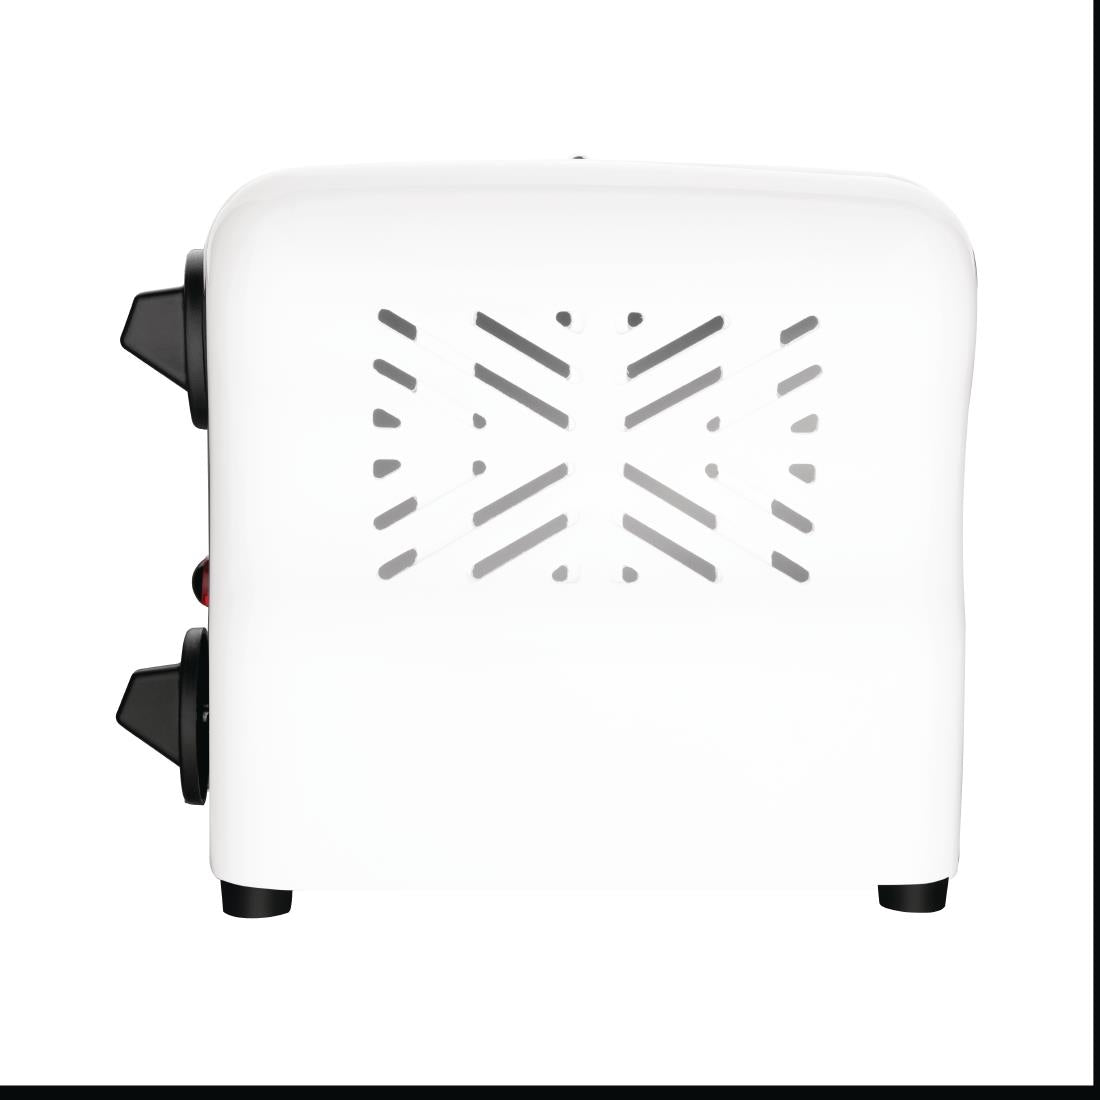 CH178 Rowlett Esprit 2 Slot Toaster White w/ 2 Additional Elements & Sandwich Cage JD Catering Equipment Solutions Ltd